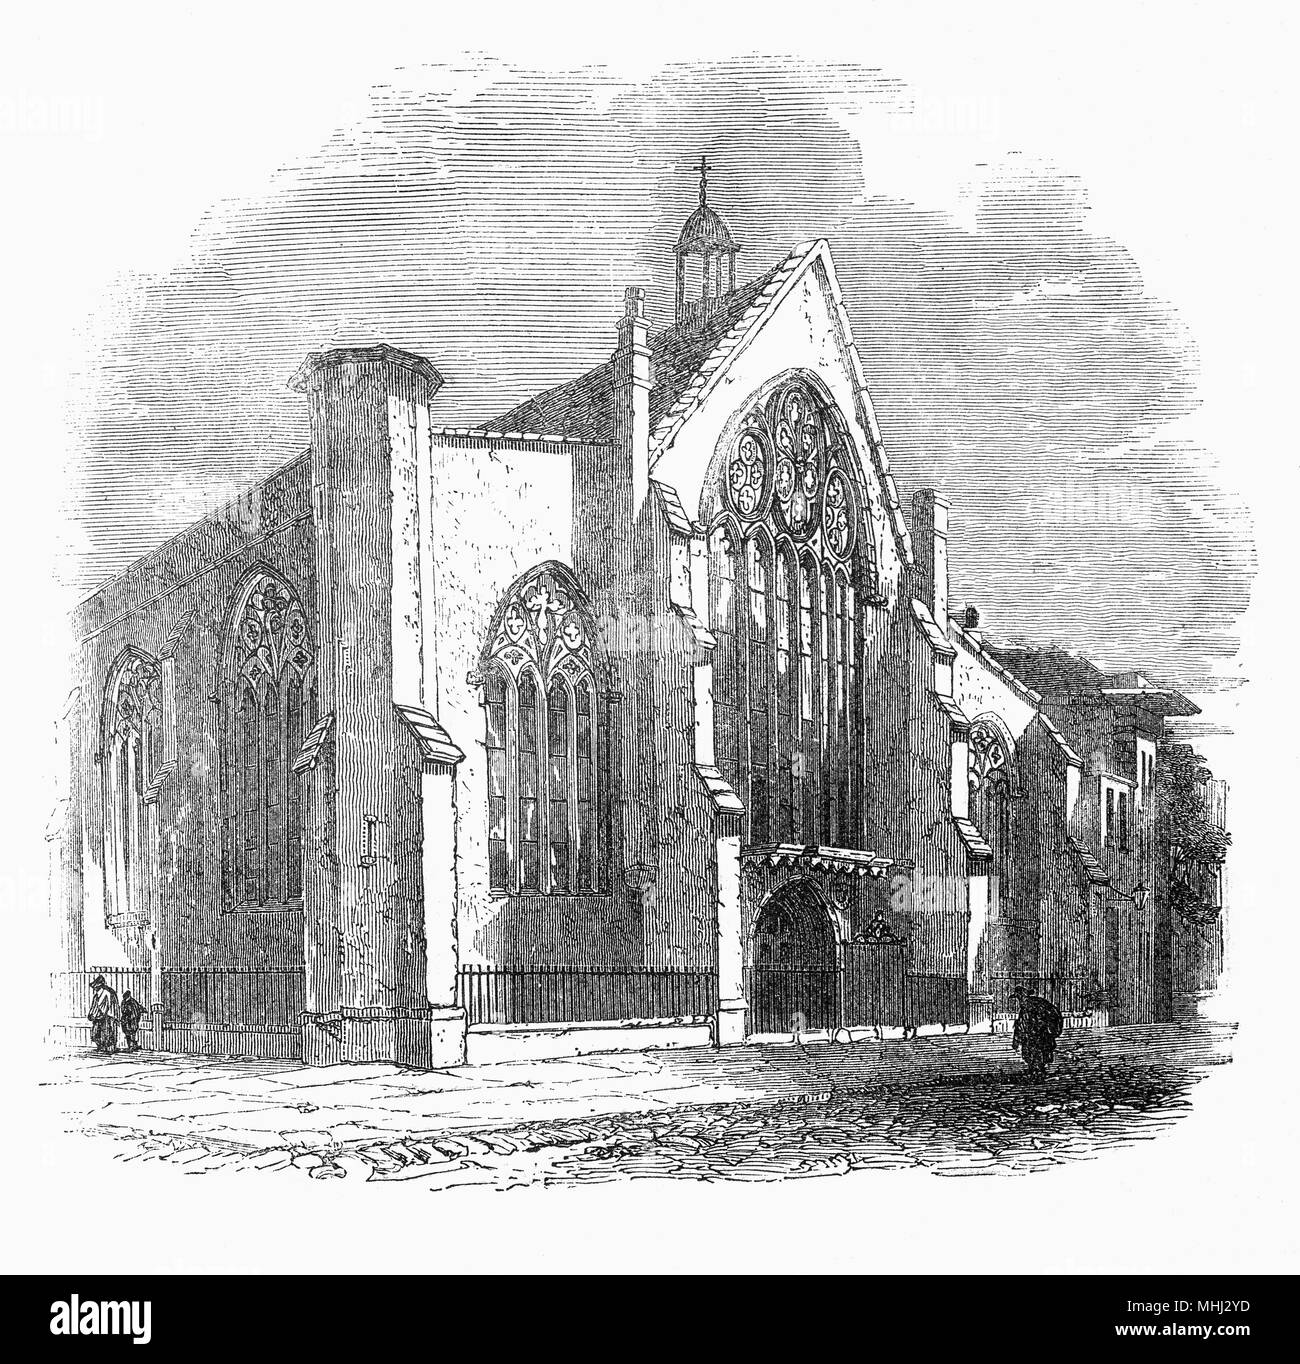 A 19th Century view of the Dutch Church, Austin Friars before it was destroyed during the London Blitz. It was located on the site of the 13th-century Augustinian friary and after it was dissolved in 1538, it was granted to Protestant refugees for church services in 1550 by King Edward VI.  By 1570, the Dutch community was the largest group of expatriates in London, half of them were Protestants who fled the Flemish Low Countries due to religious persecution. Others were skilled craftsman who came to England for economic opportunities. Stock Photo